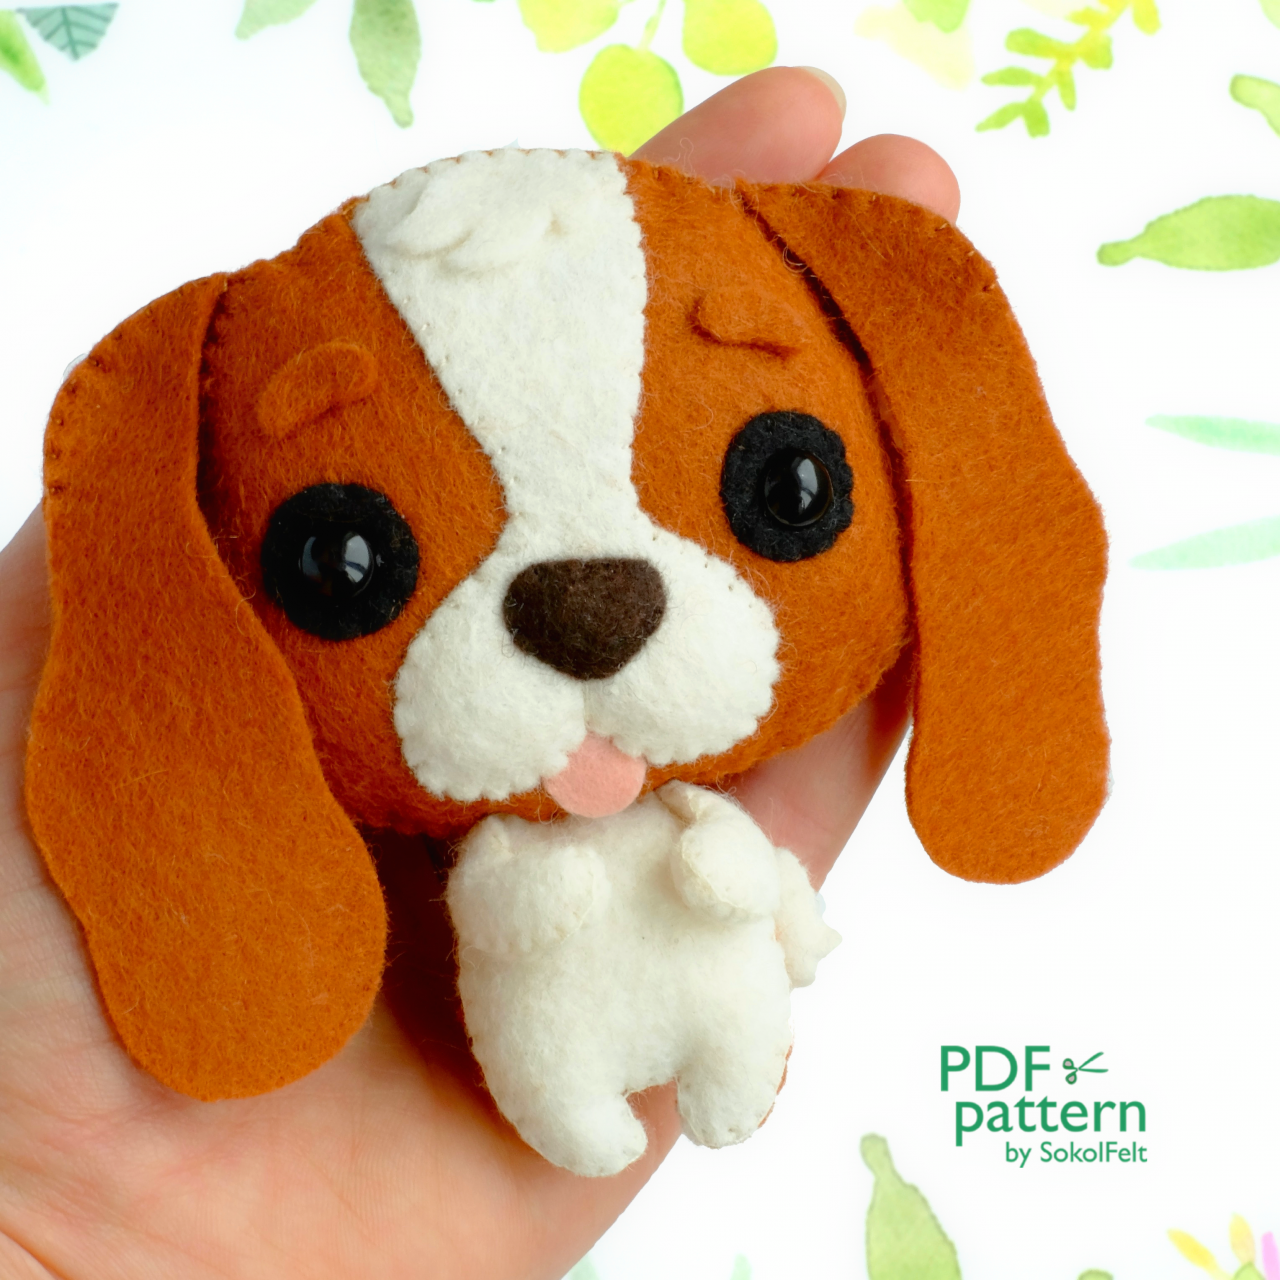 Cavalier King Charles Spaniel felt toy sewing PDF and SVG patterns, Cute dog sewing tutorial, Dog lover gift, Baby crib mobile toy